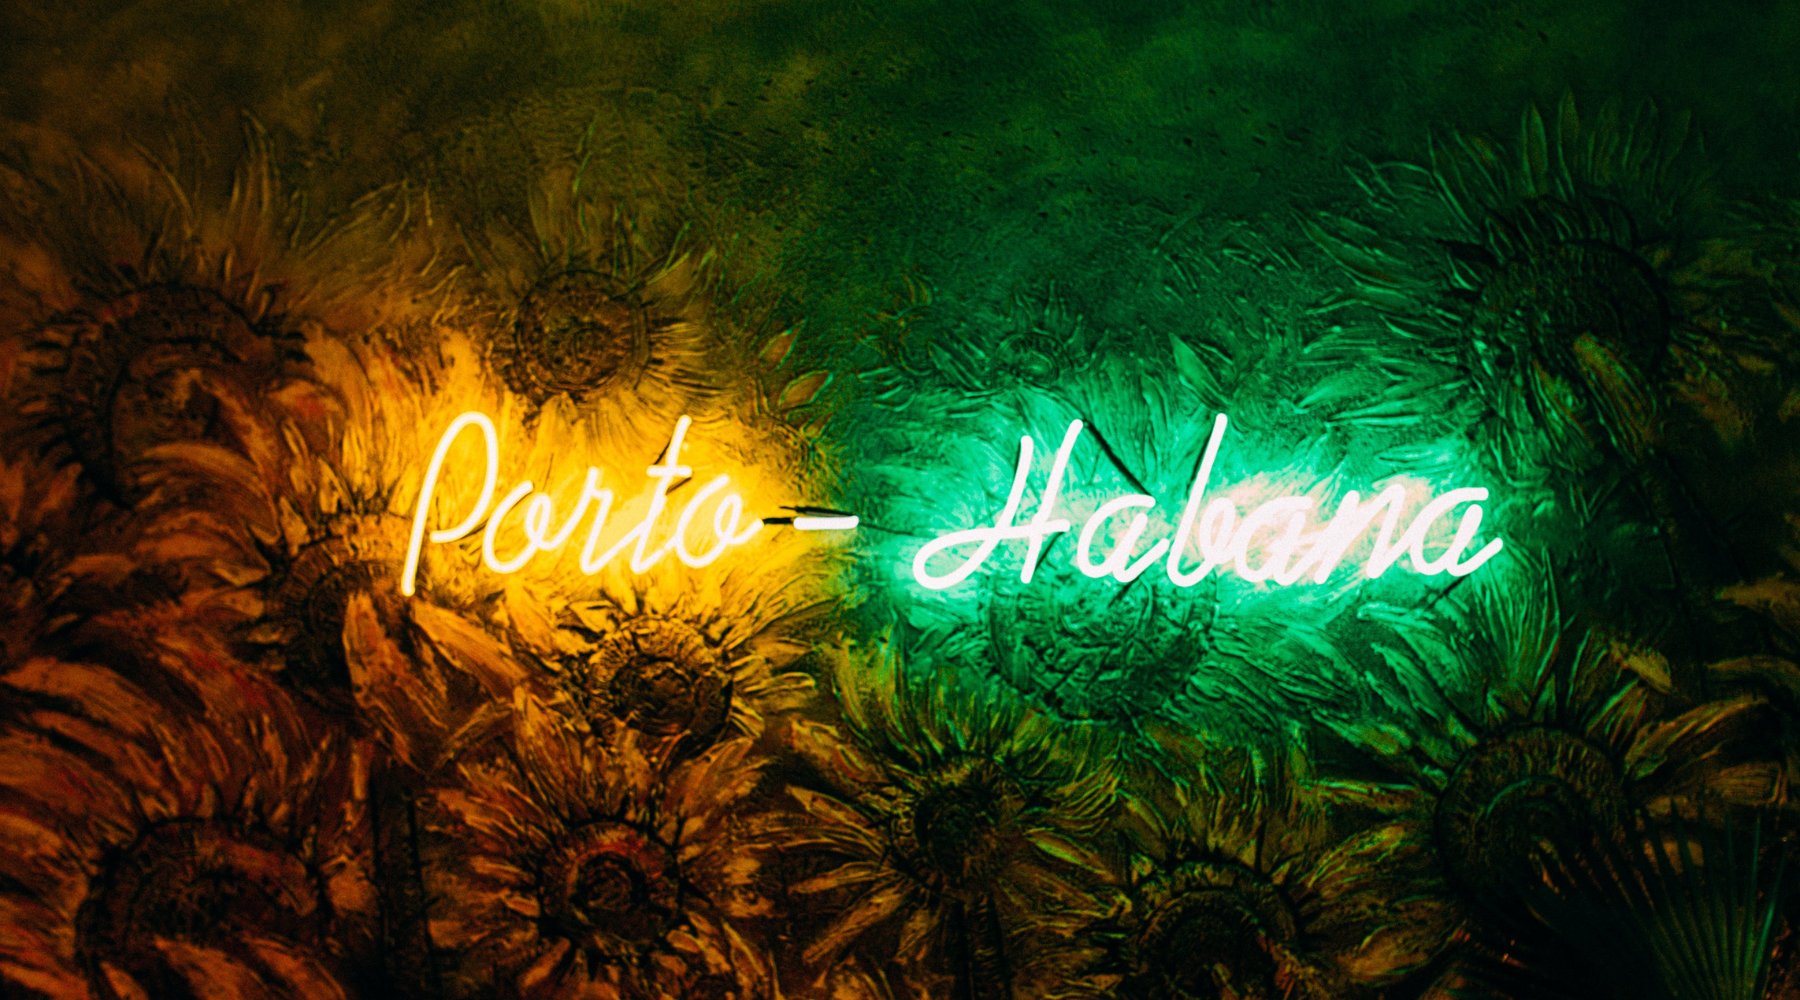 Customized Neon Signs for Artists and Creatives